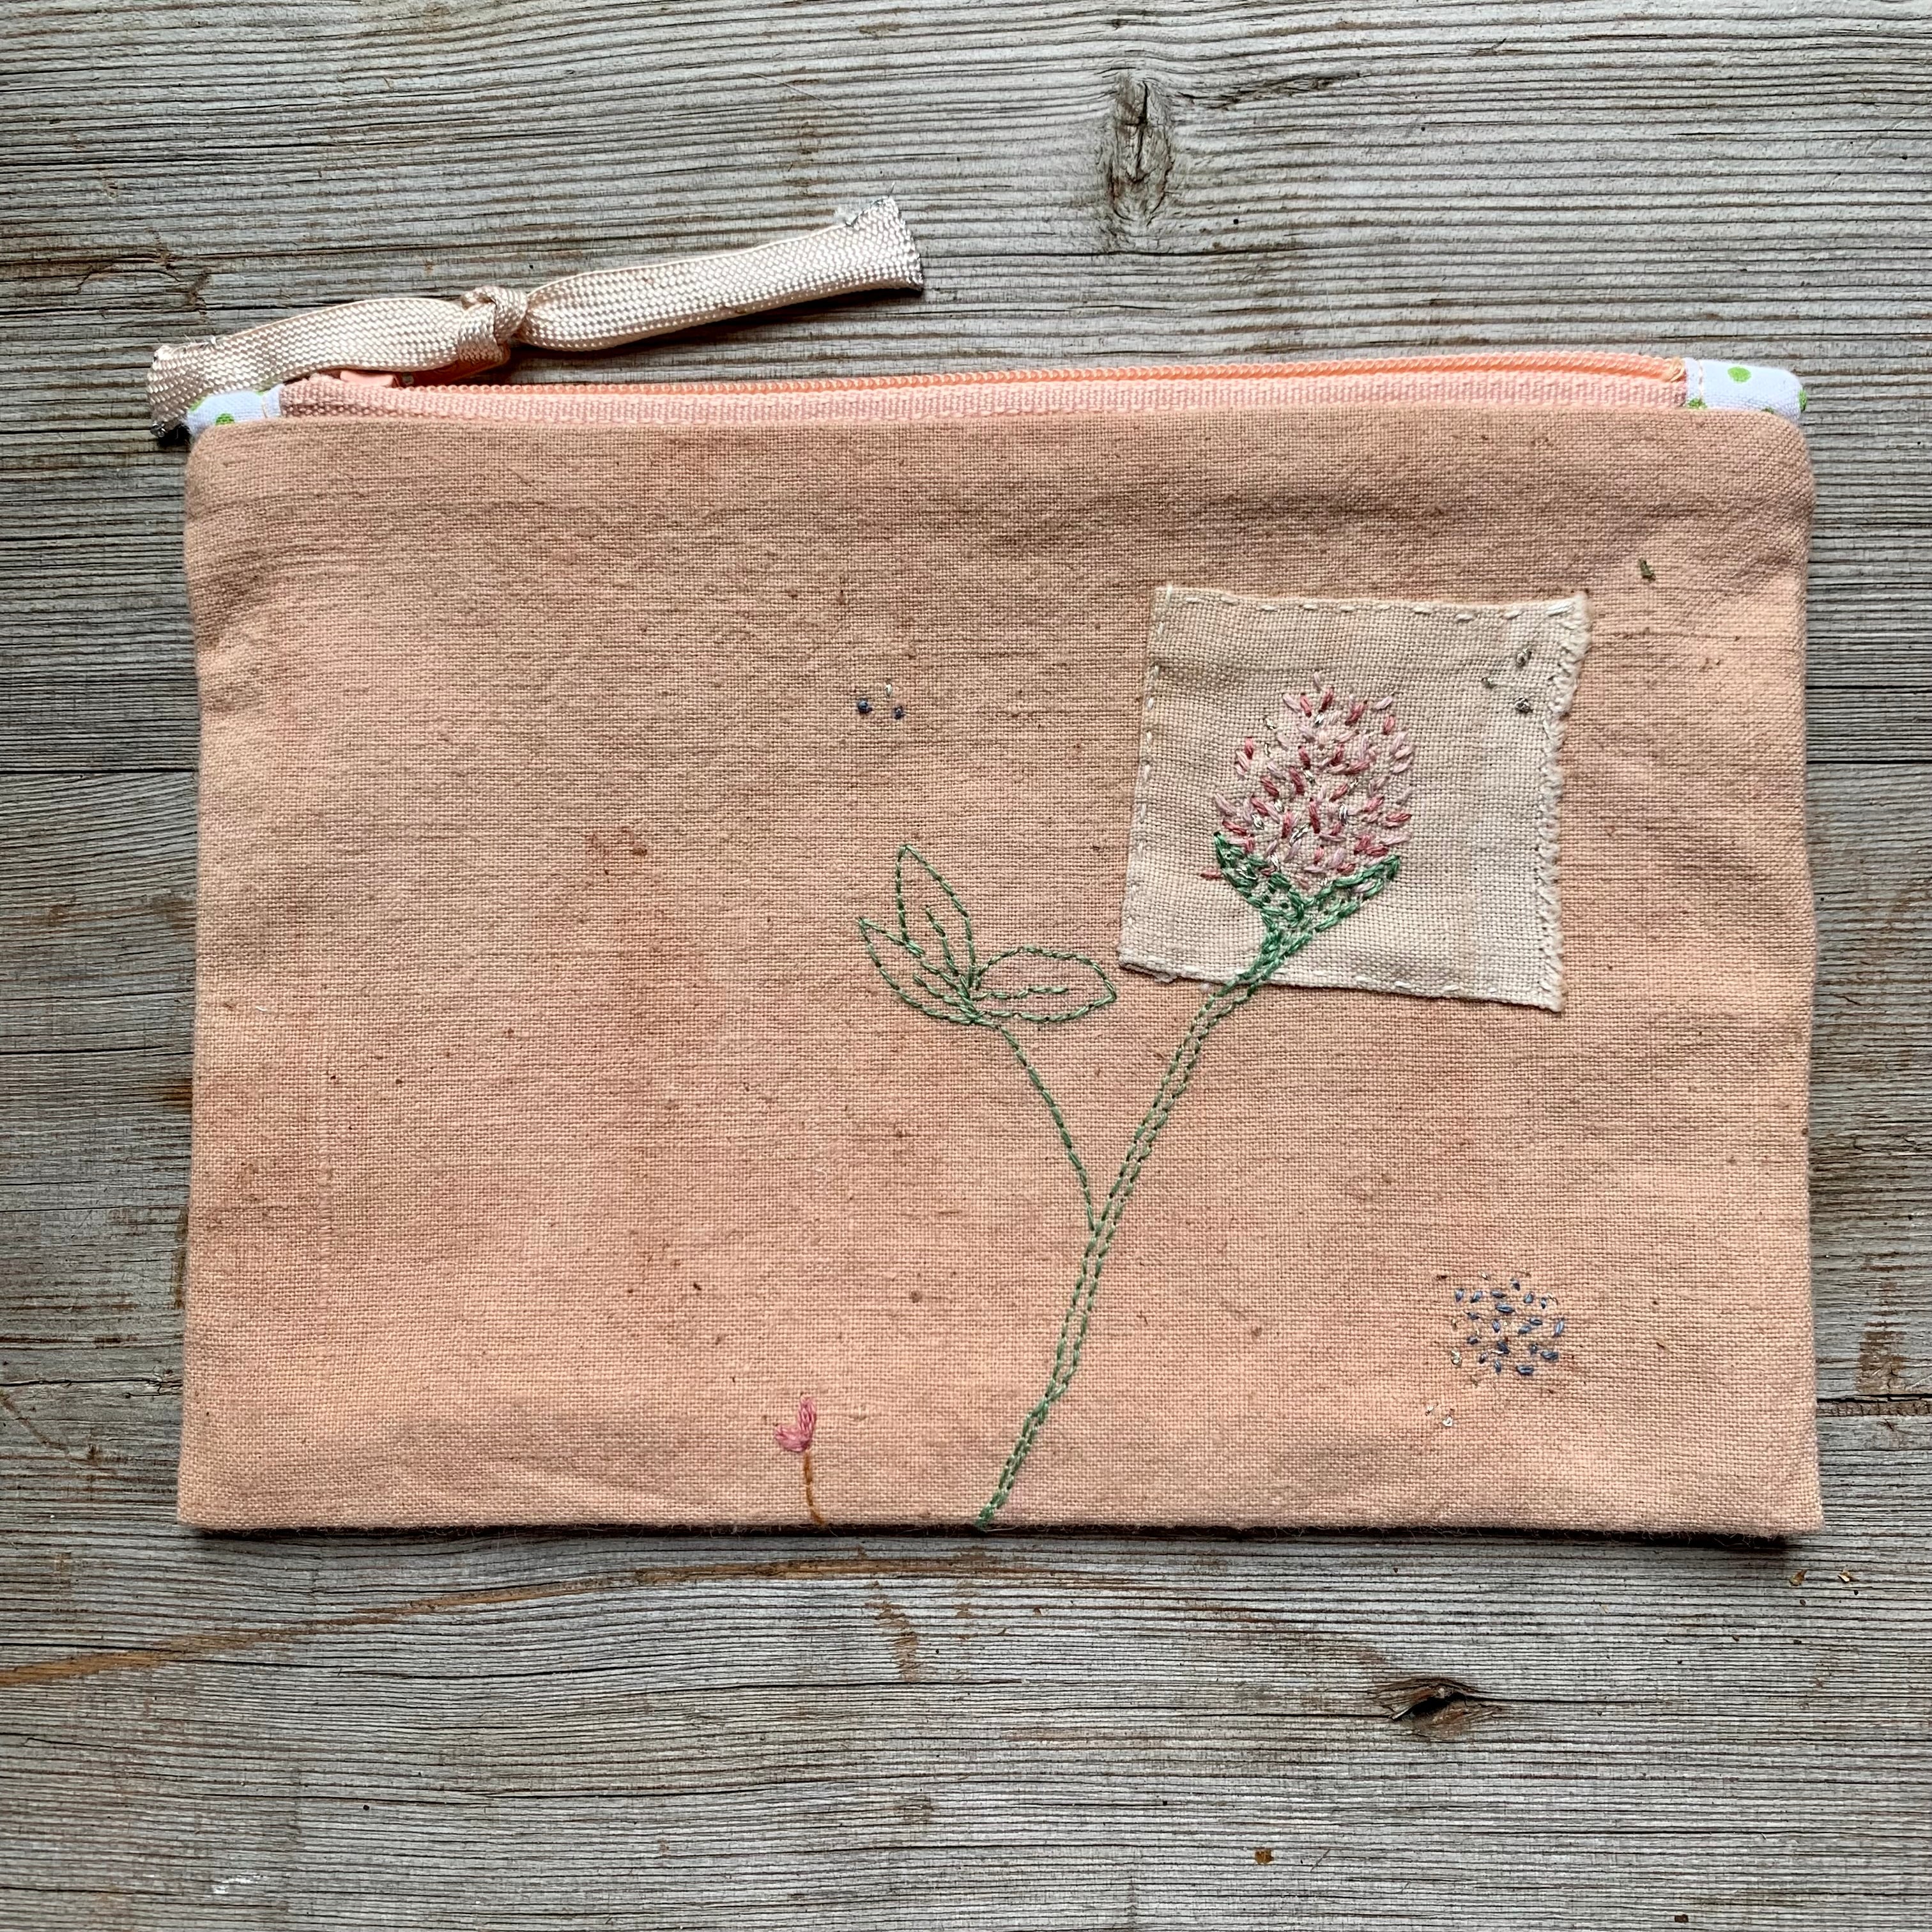 in bottega Naturally dyed + Stitched Haberdashery Pouch